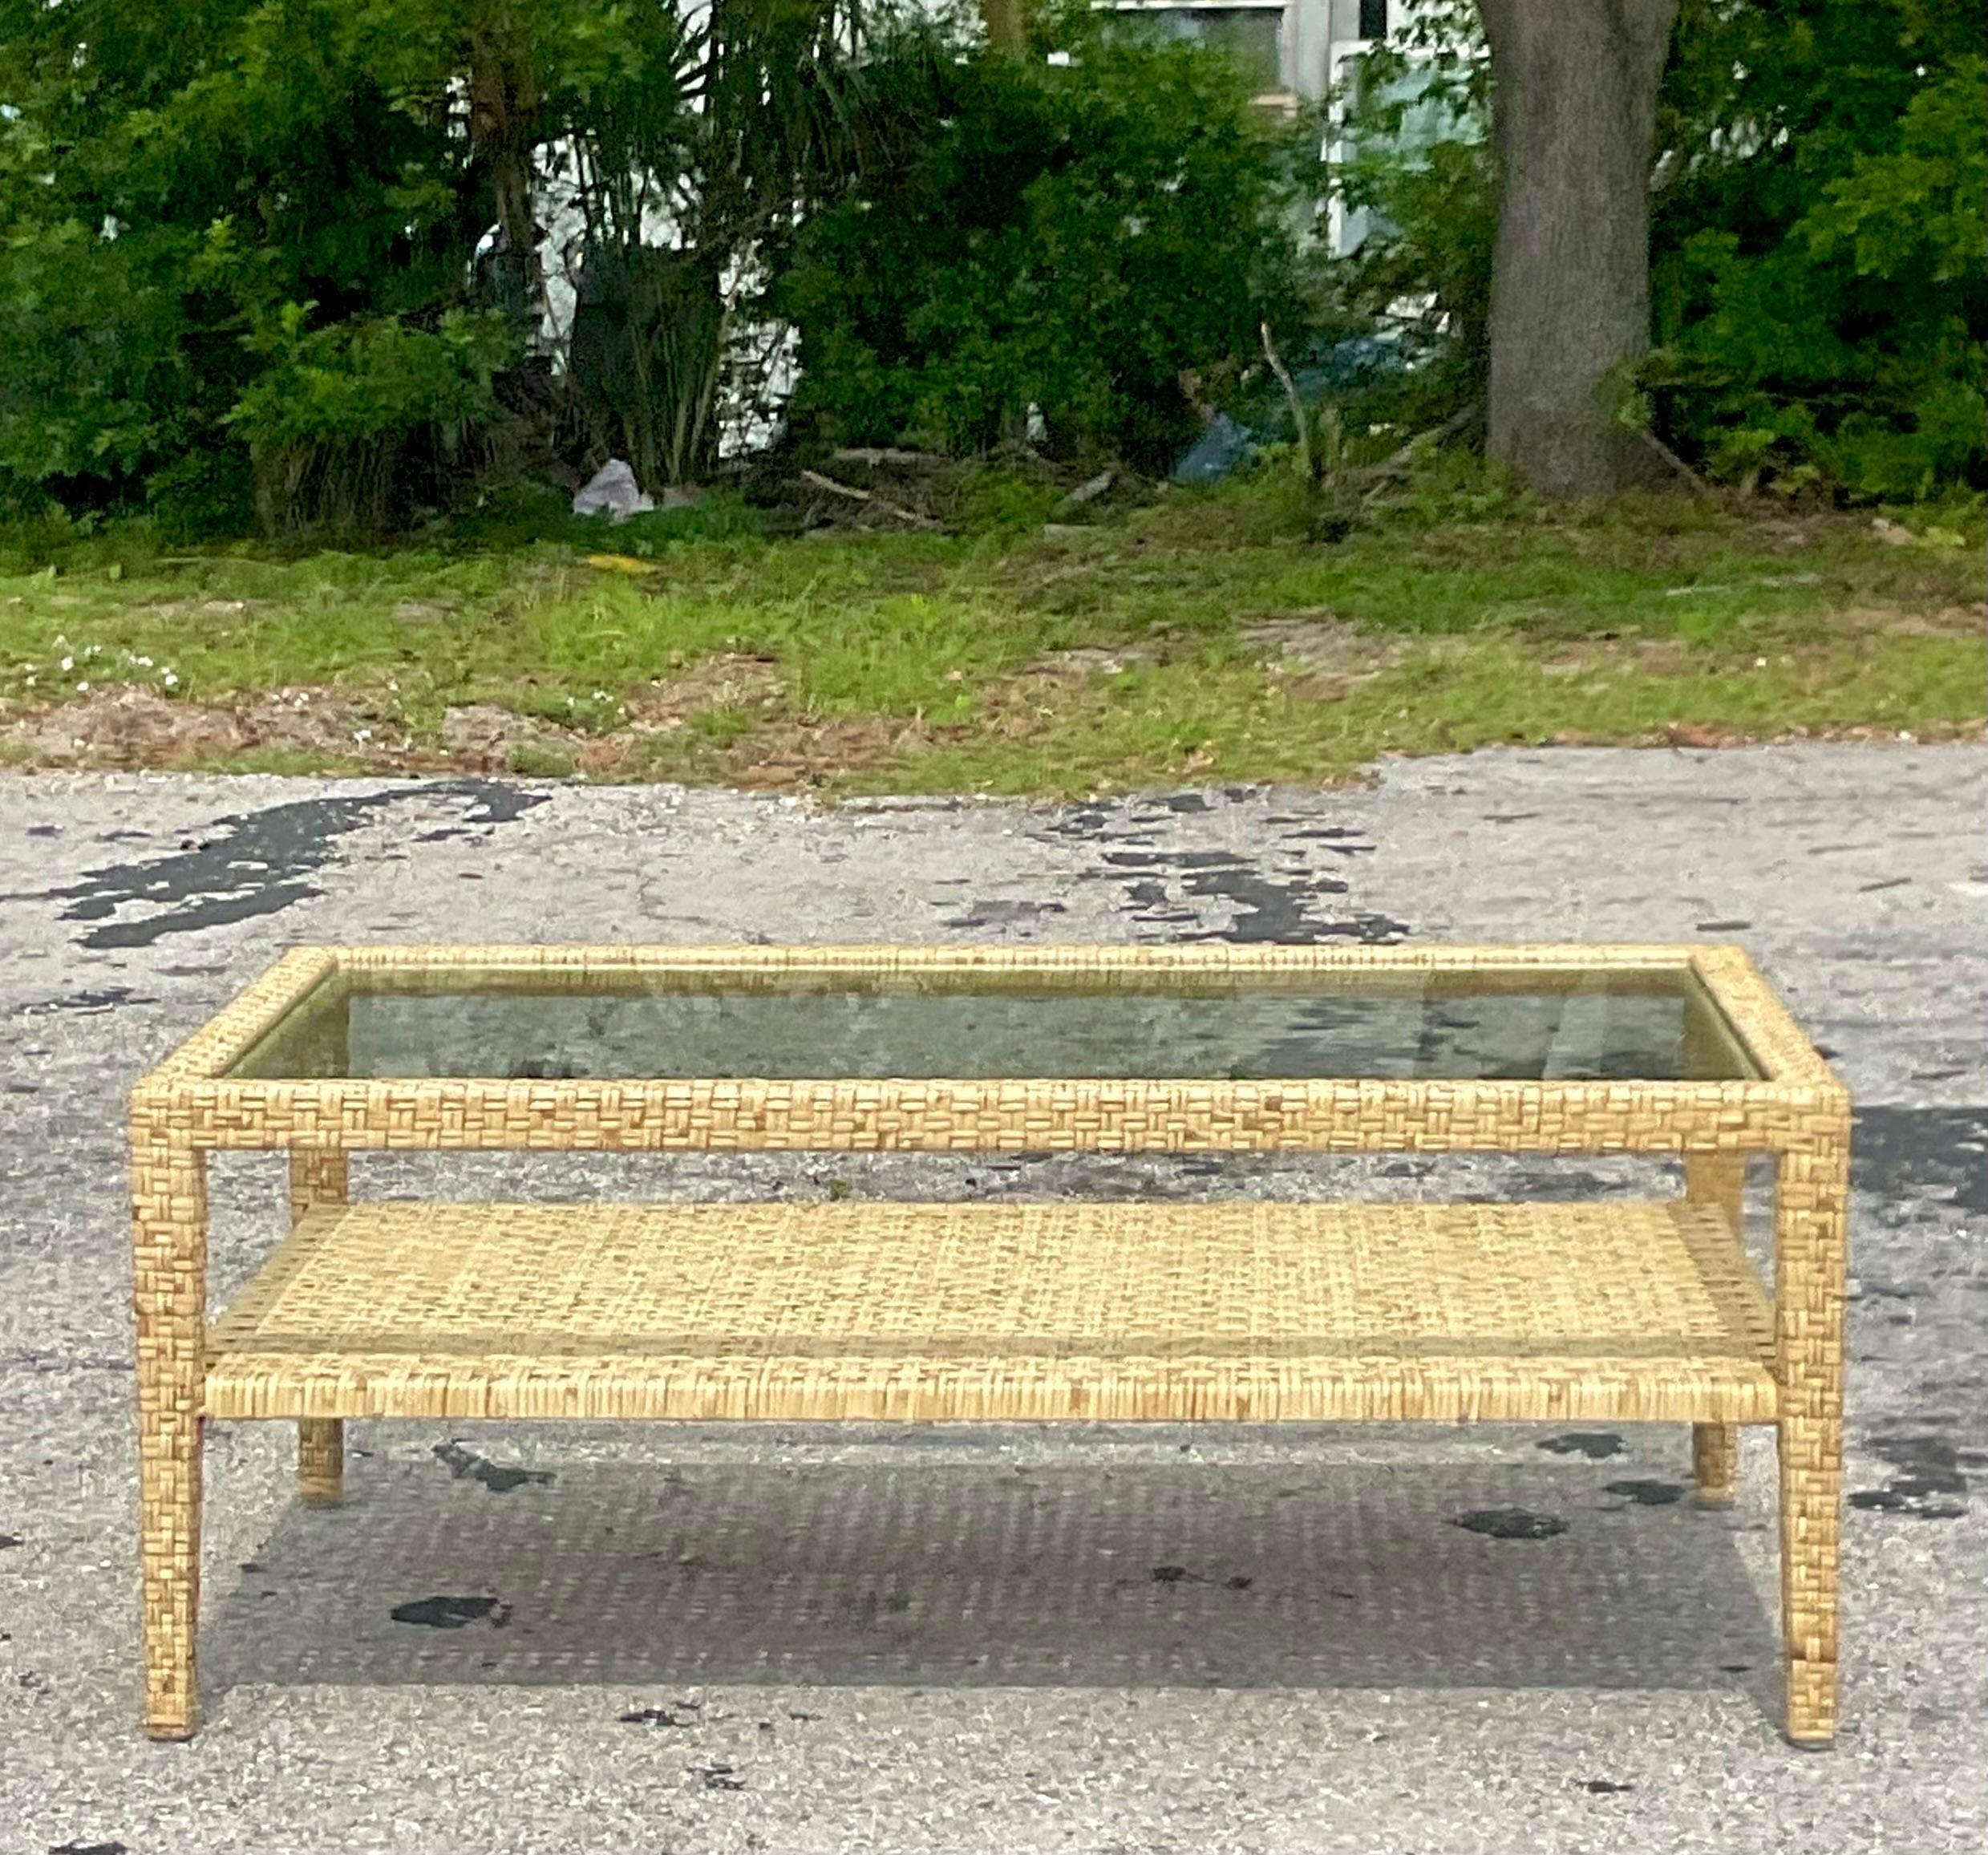 A fabulous vintage Coastal coffee table. Made by the iconic McGuire group. A fabulous limited edition design with woven wide ribbon rattan. Inset glass top. Tagged with the logo. Acquired from a Palm Beach estate.